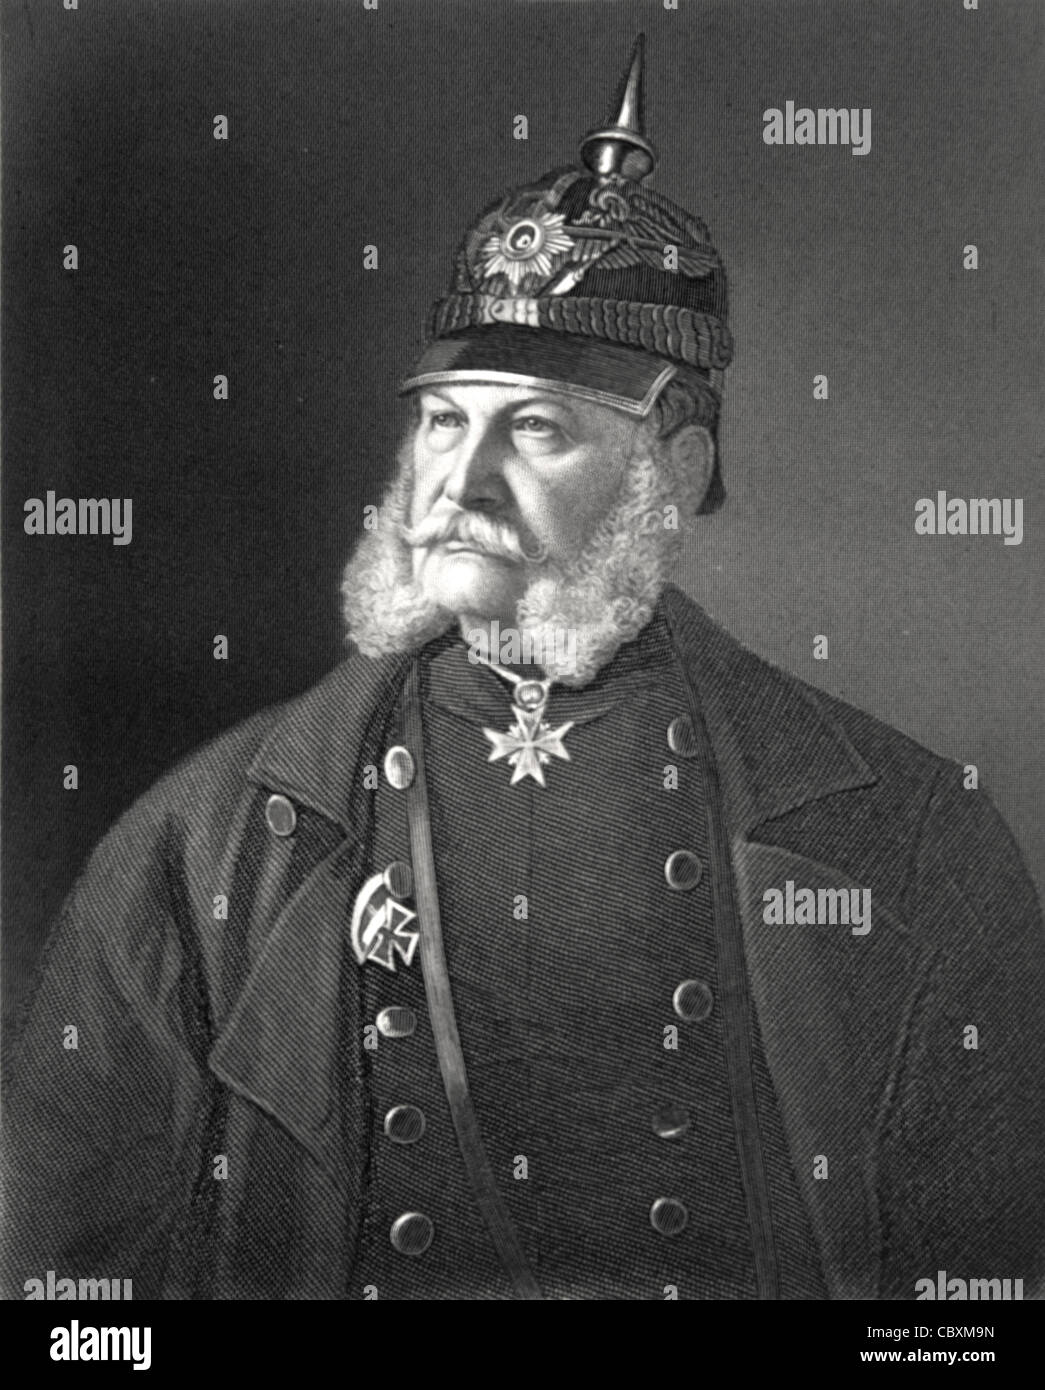 Portrait of William I of Germany & Prussia, Wilhelm Friedrich Ludwig (1797-1888) Emperor of Germany (1871-88) & King of Prussia (1861-88). Vintage Illustration or Engraving Stock Photo